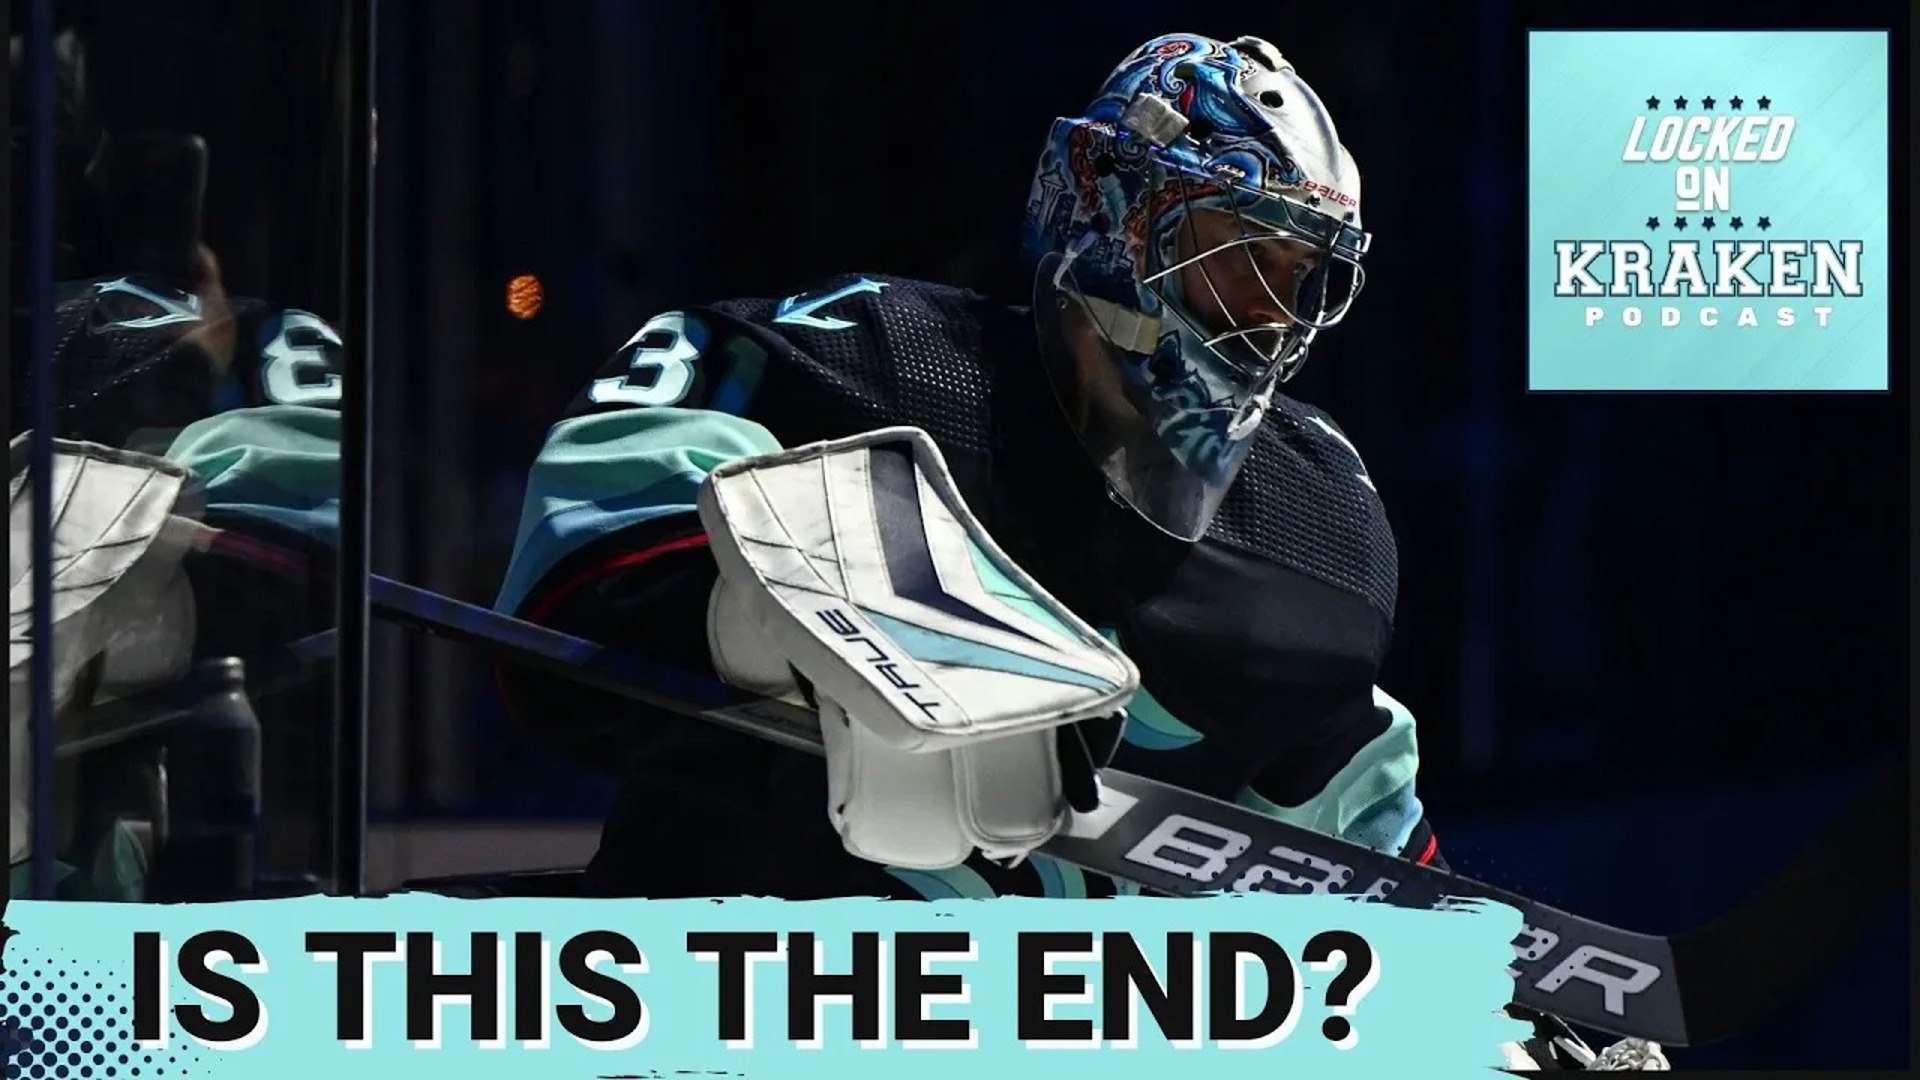 In this episode of Locked on Kraken, host Erica L. Ayala dives deep into the future of Philipp Grubauer with the Seattle Kraken.